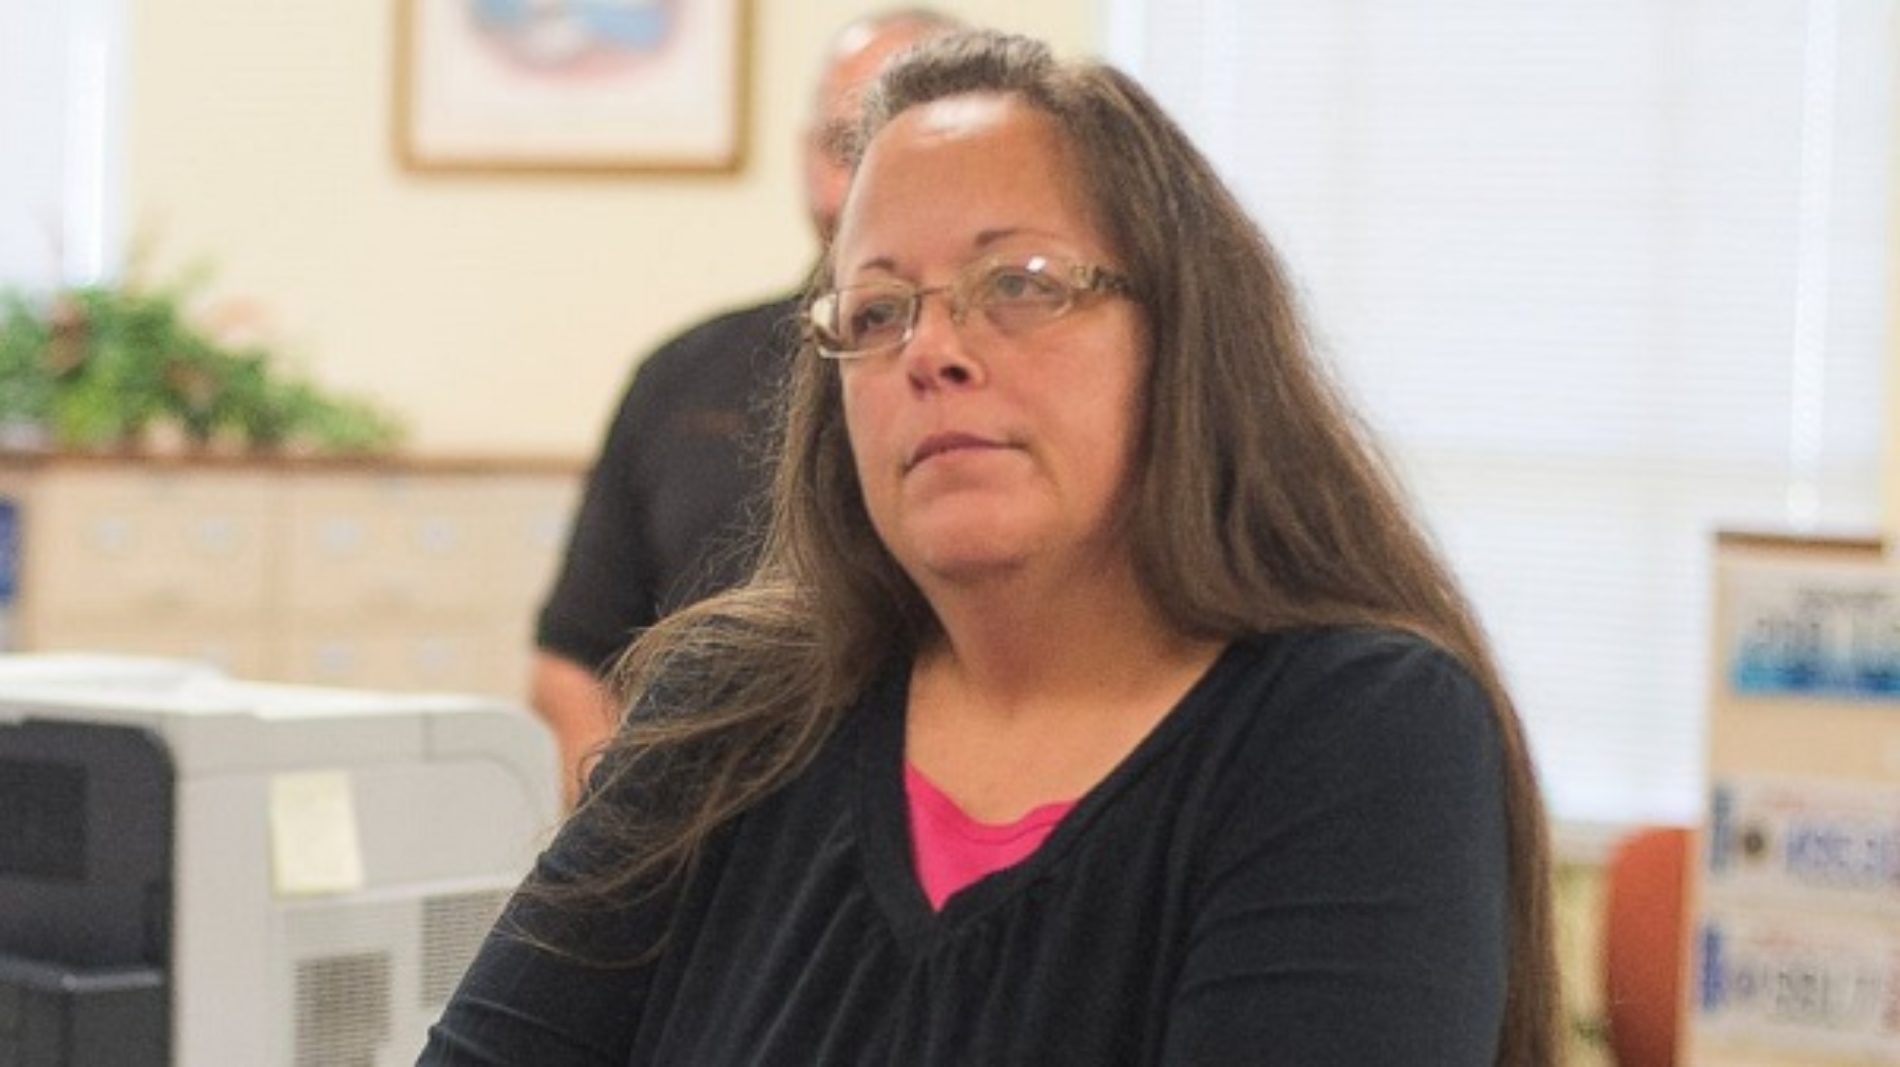 That Humorous Piece About The Antigay County Clerk Kim Davis